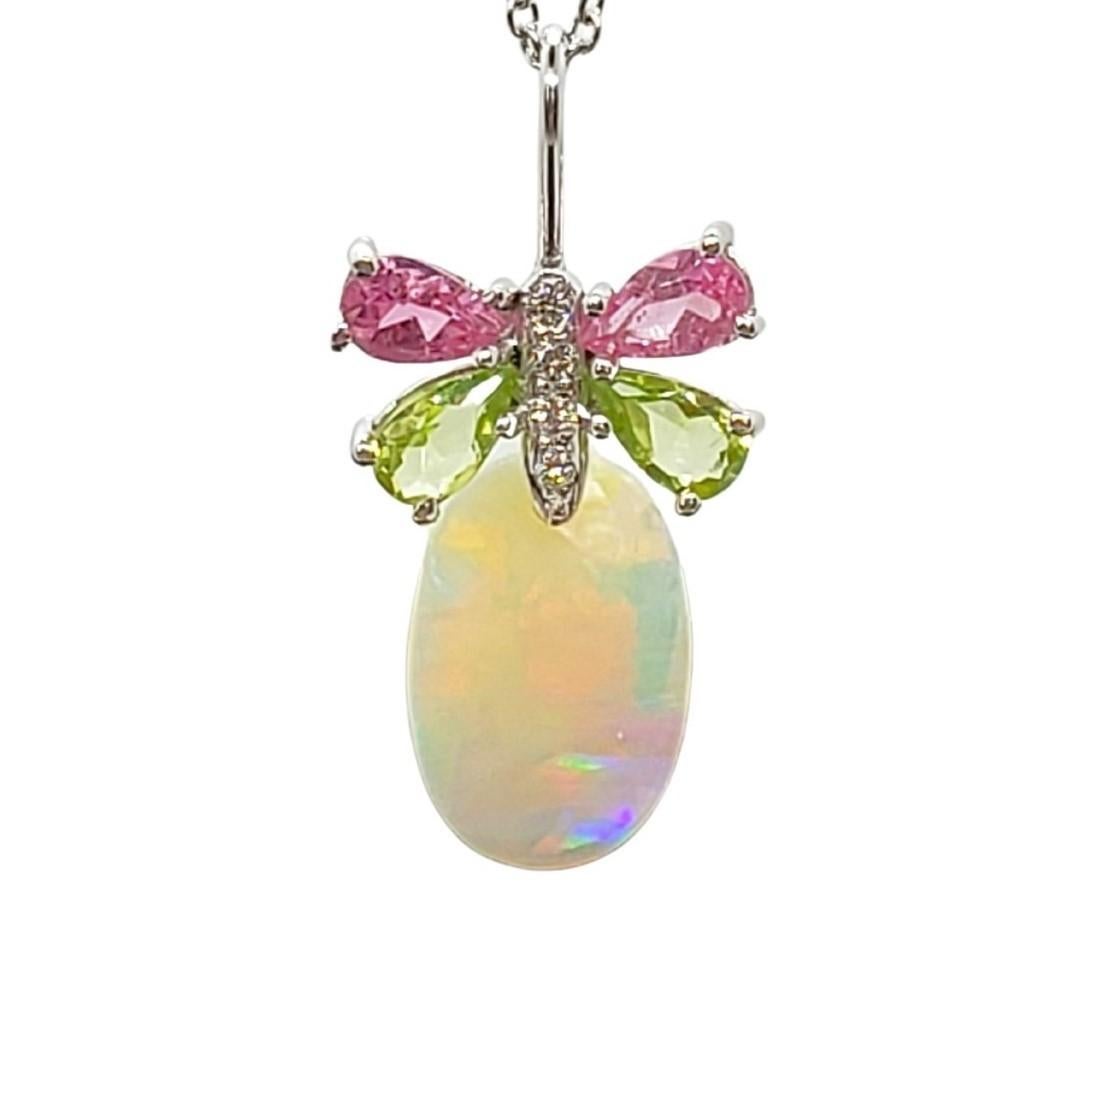 Uplifting combination of gemstone colors of Pink Tourmaline, Peridot, diamonds and Australian Opal. The Butterfly Necklace is in 14K white gold.
Only using high quality gemstones, diamonds, craftsmanship and gold, Alison creates one of a kind